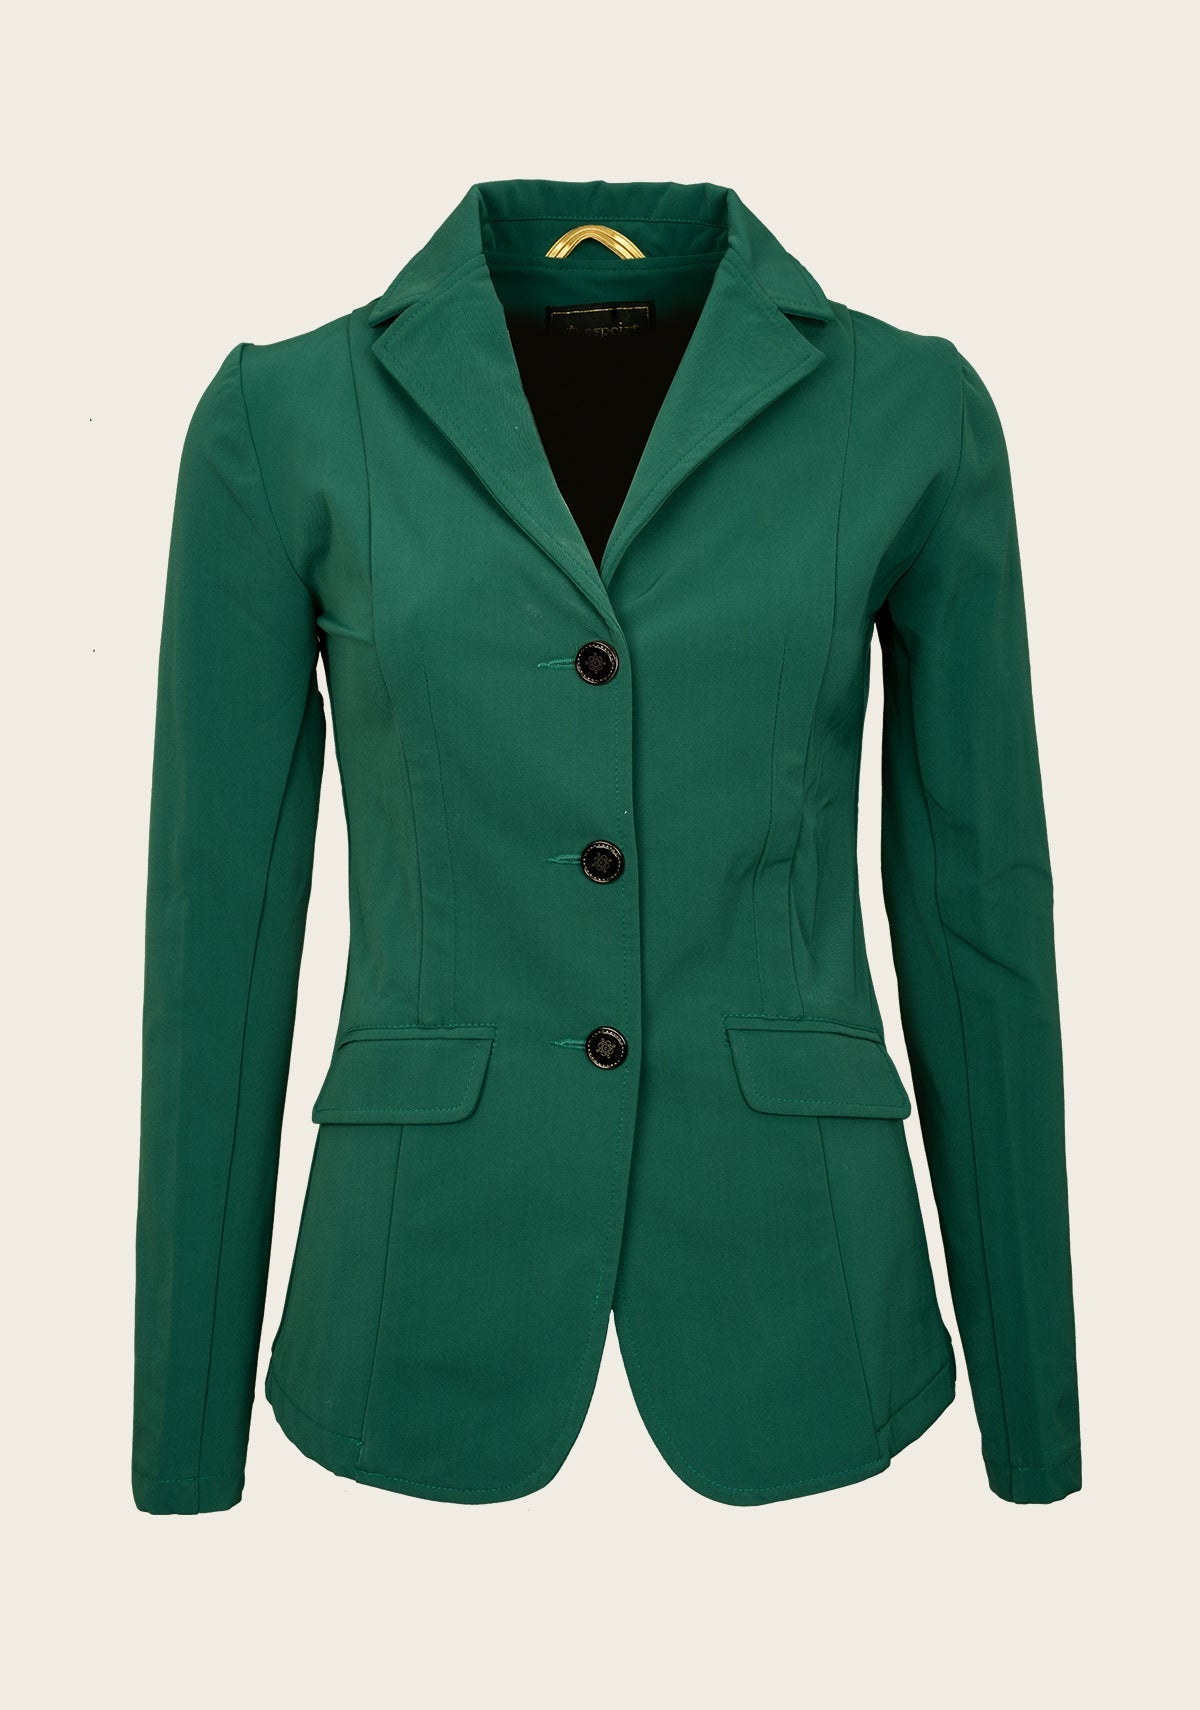 Alpine Green Competition Show Jacket